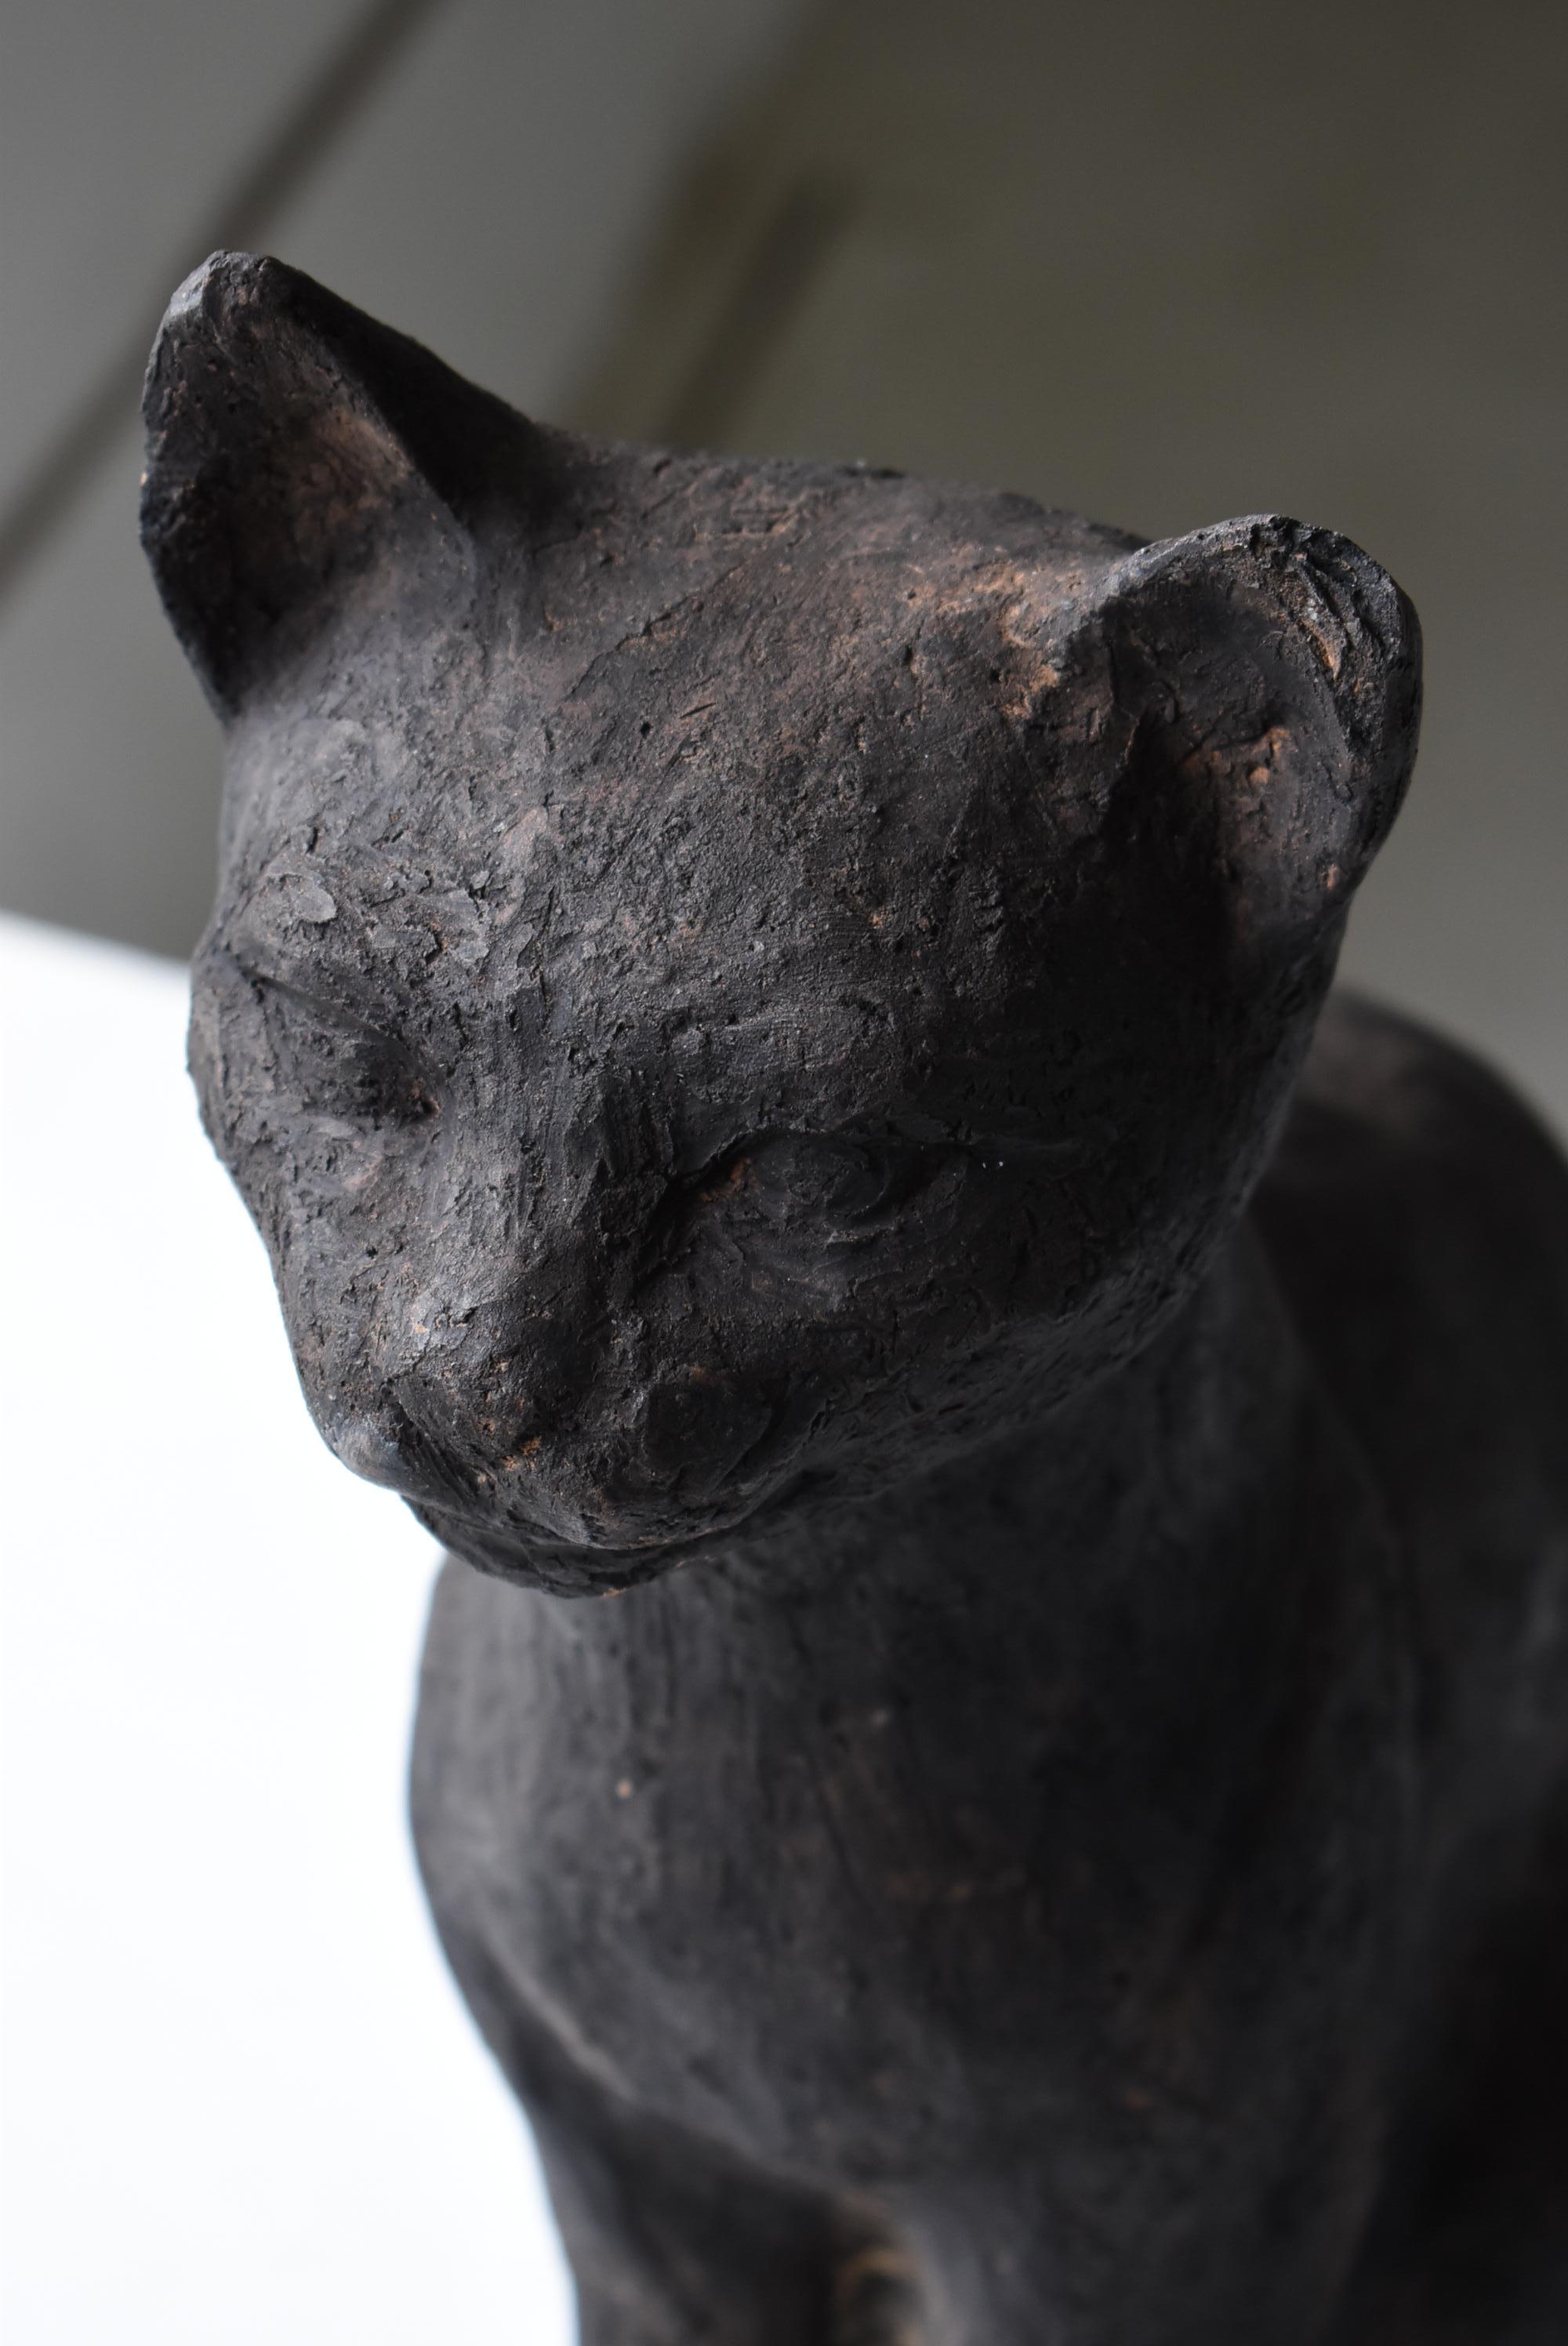 Mid-20th Century Japanese Old Clay Carving Cat 1940s-1960s / Mold Statue Wabi Sabi Scuplture  